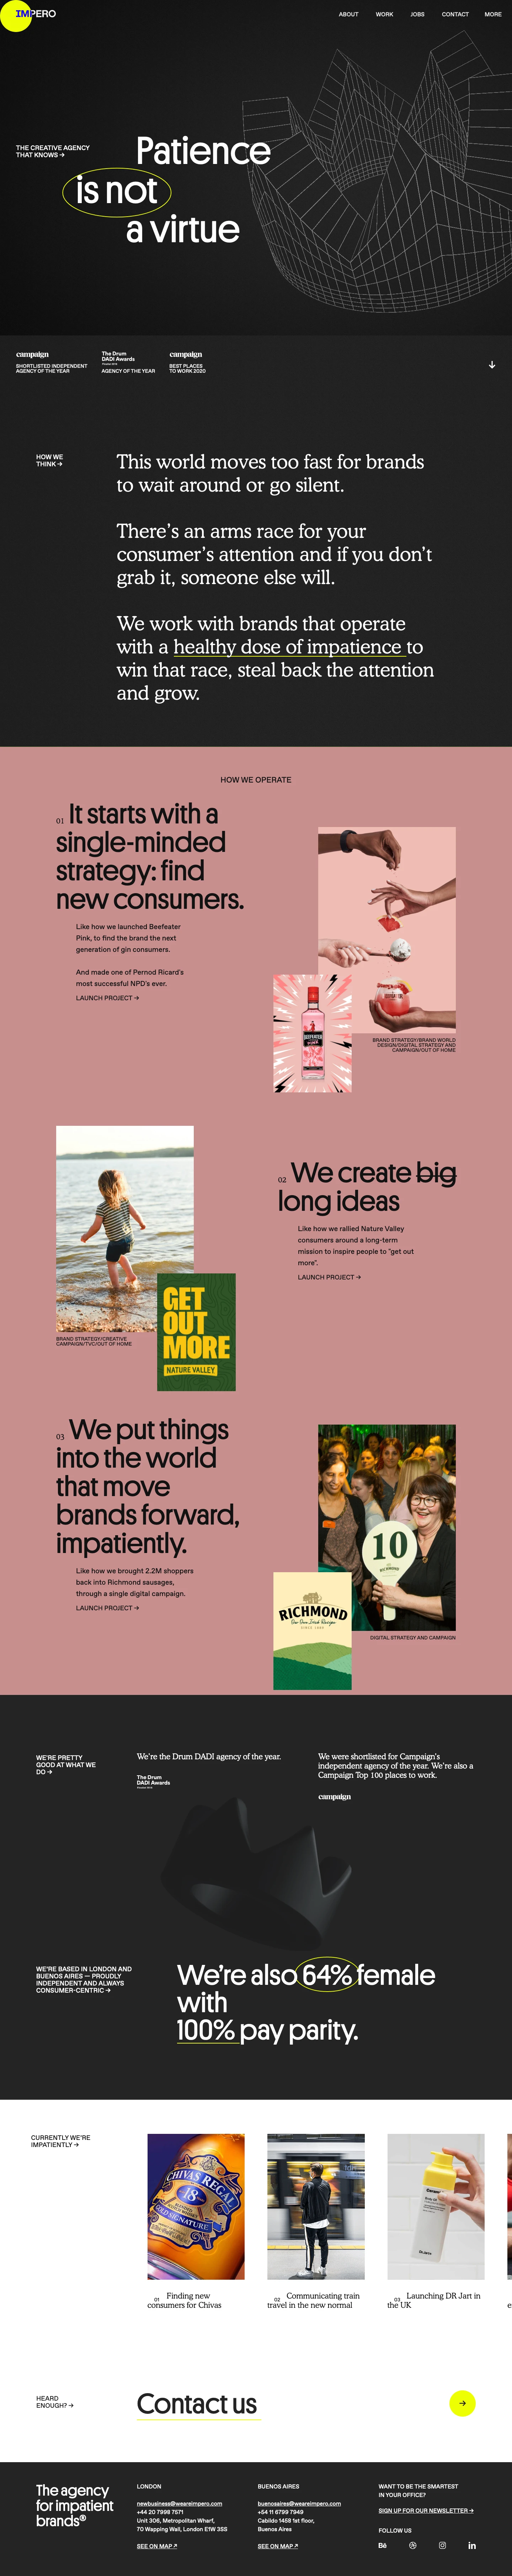 Impero Landing Page Example: We believe the world moves too fast for brands to wait around or go silent. There’s an arms race for your consumer’s attention and if you don’t grab it, someone else will. We work with brands that operate with a healthy dose of impatience to win that race, steal back the attention and grow.